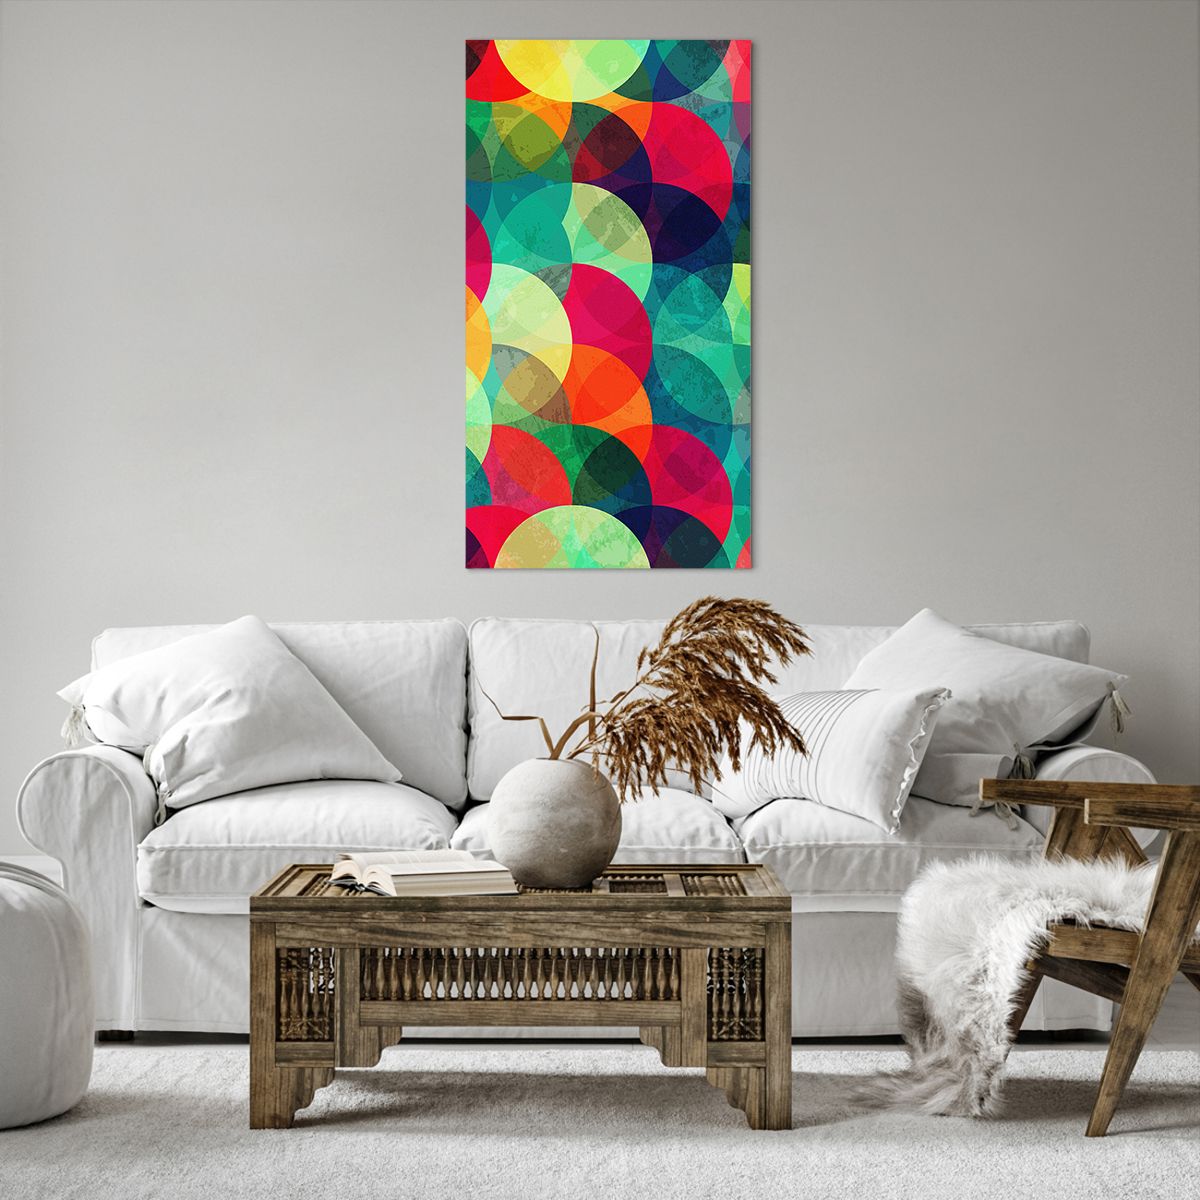 Canvas picture Abstraction, Canvas picture Art, Canvas picture Colorful Circles, Canvas picture Modern Art, Canvas picture Artistic Art